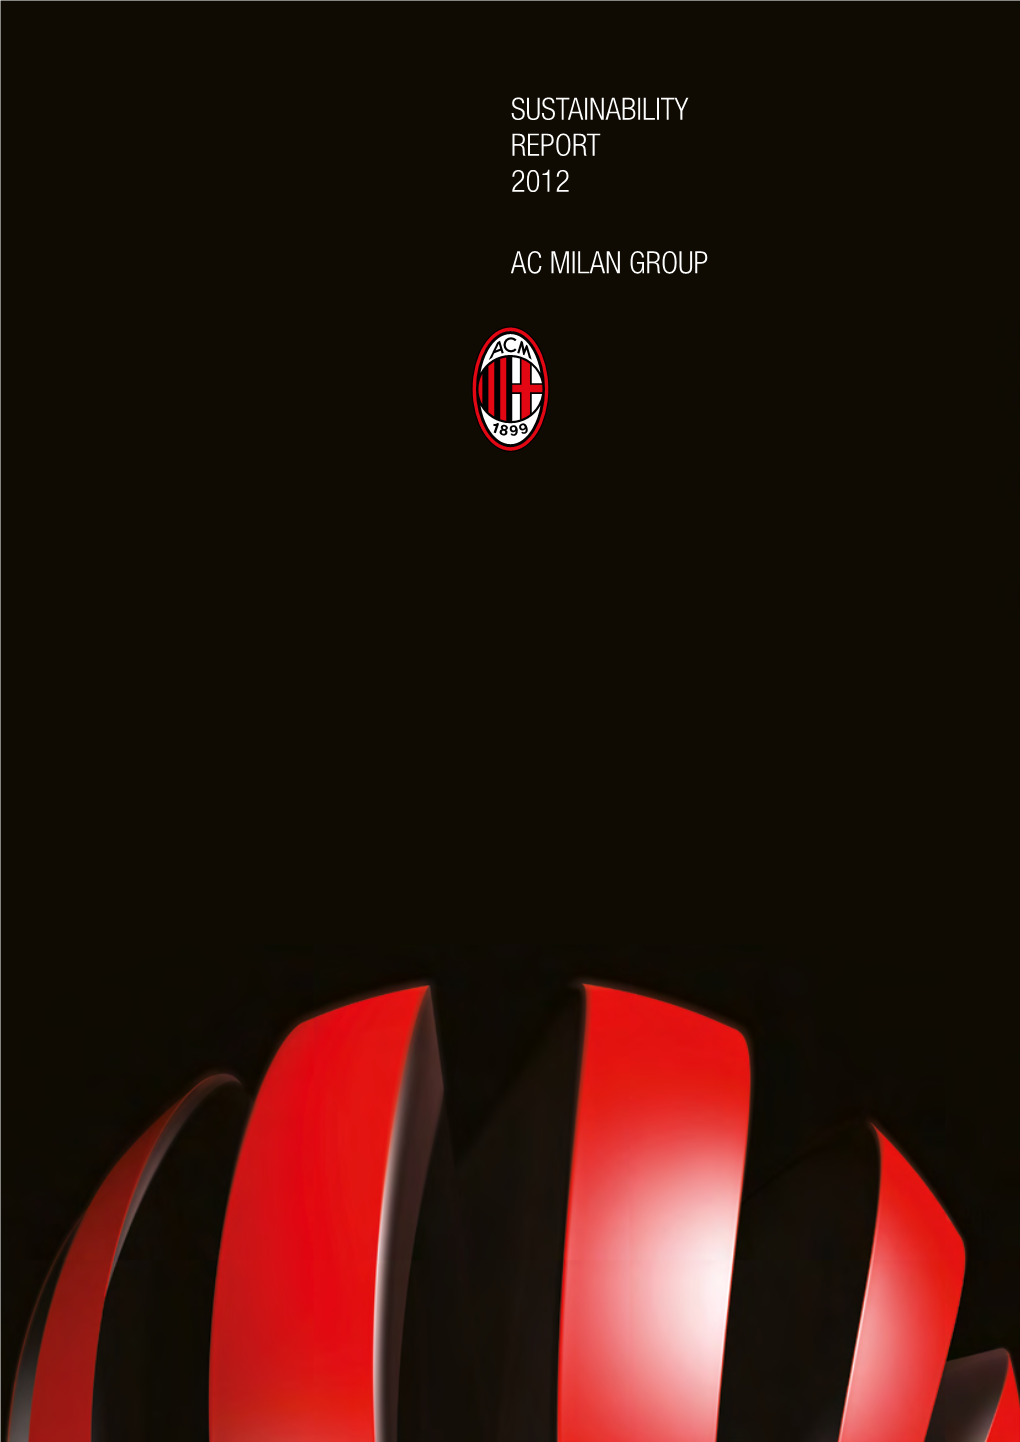 Sustainability Report 2012 Ac Milan Group